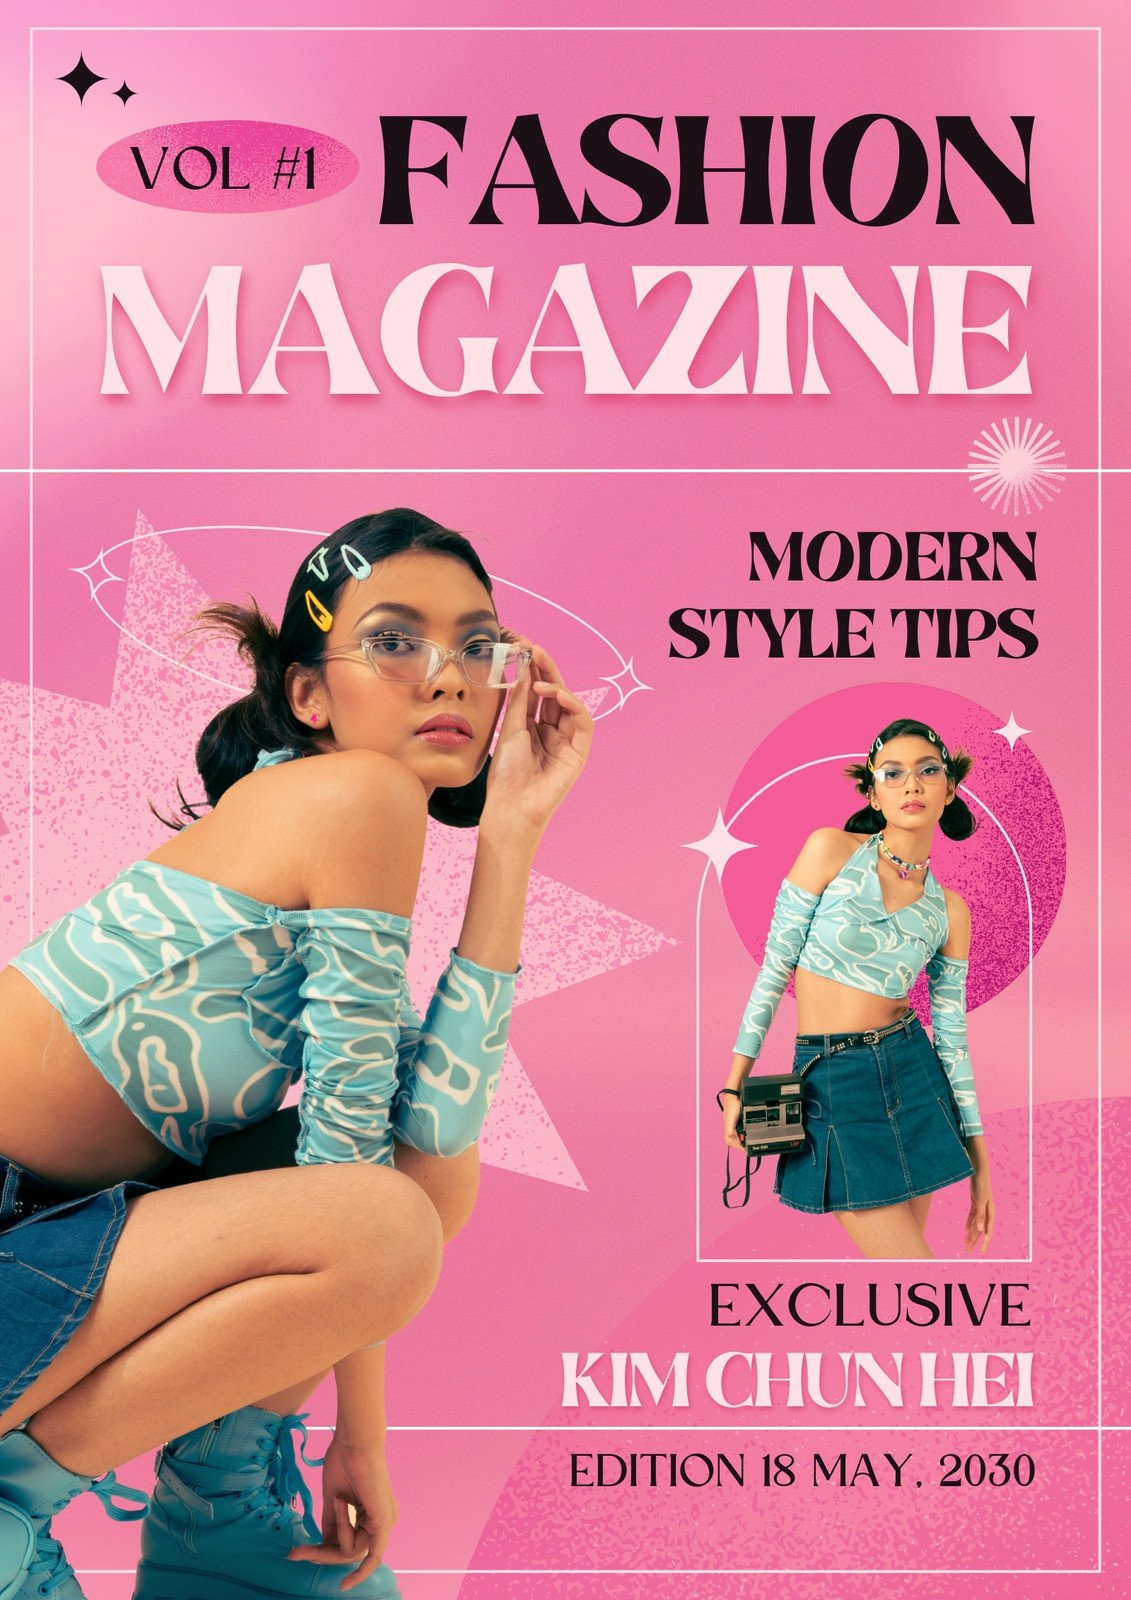 Page 5 - Free beautiful magazine covers you can customize